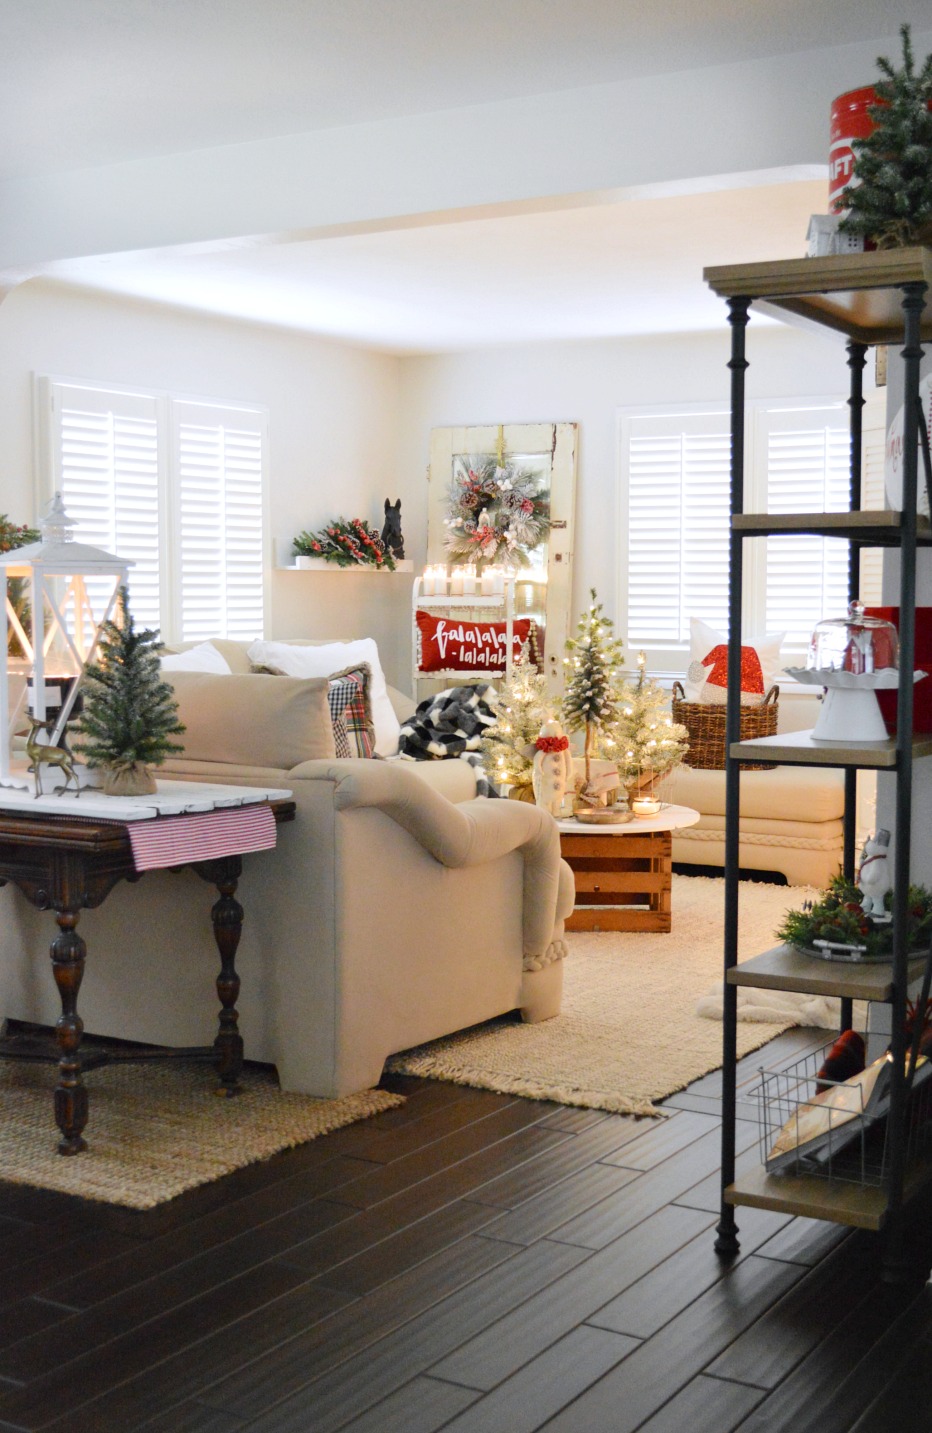 Merry Christmas Cottage Mantel Decorating - Better Homes & Gardens shelf, vintage fruit box coffee table